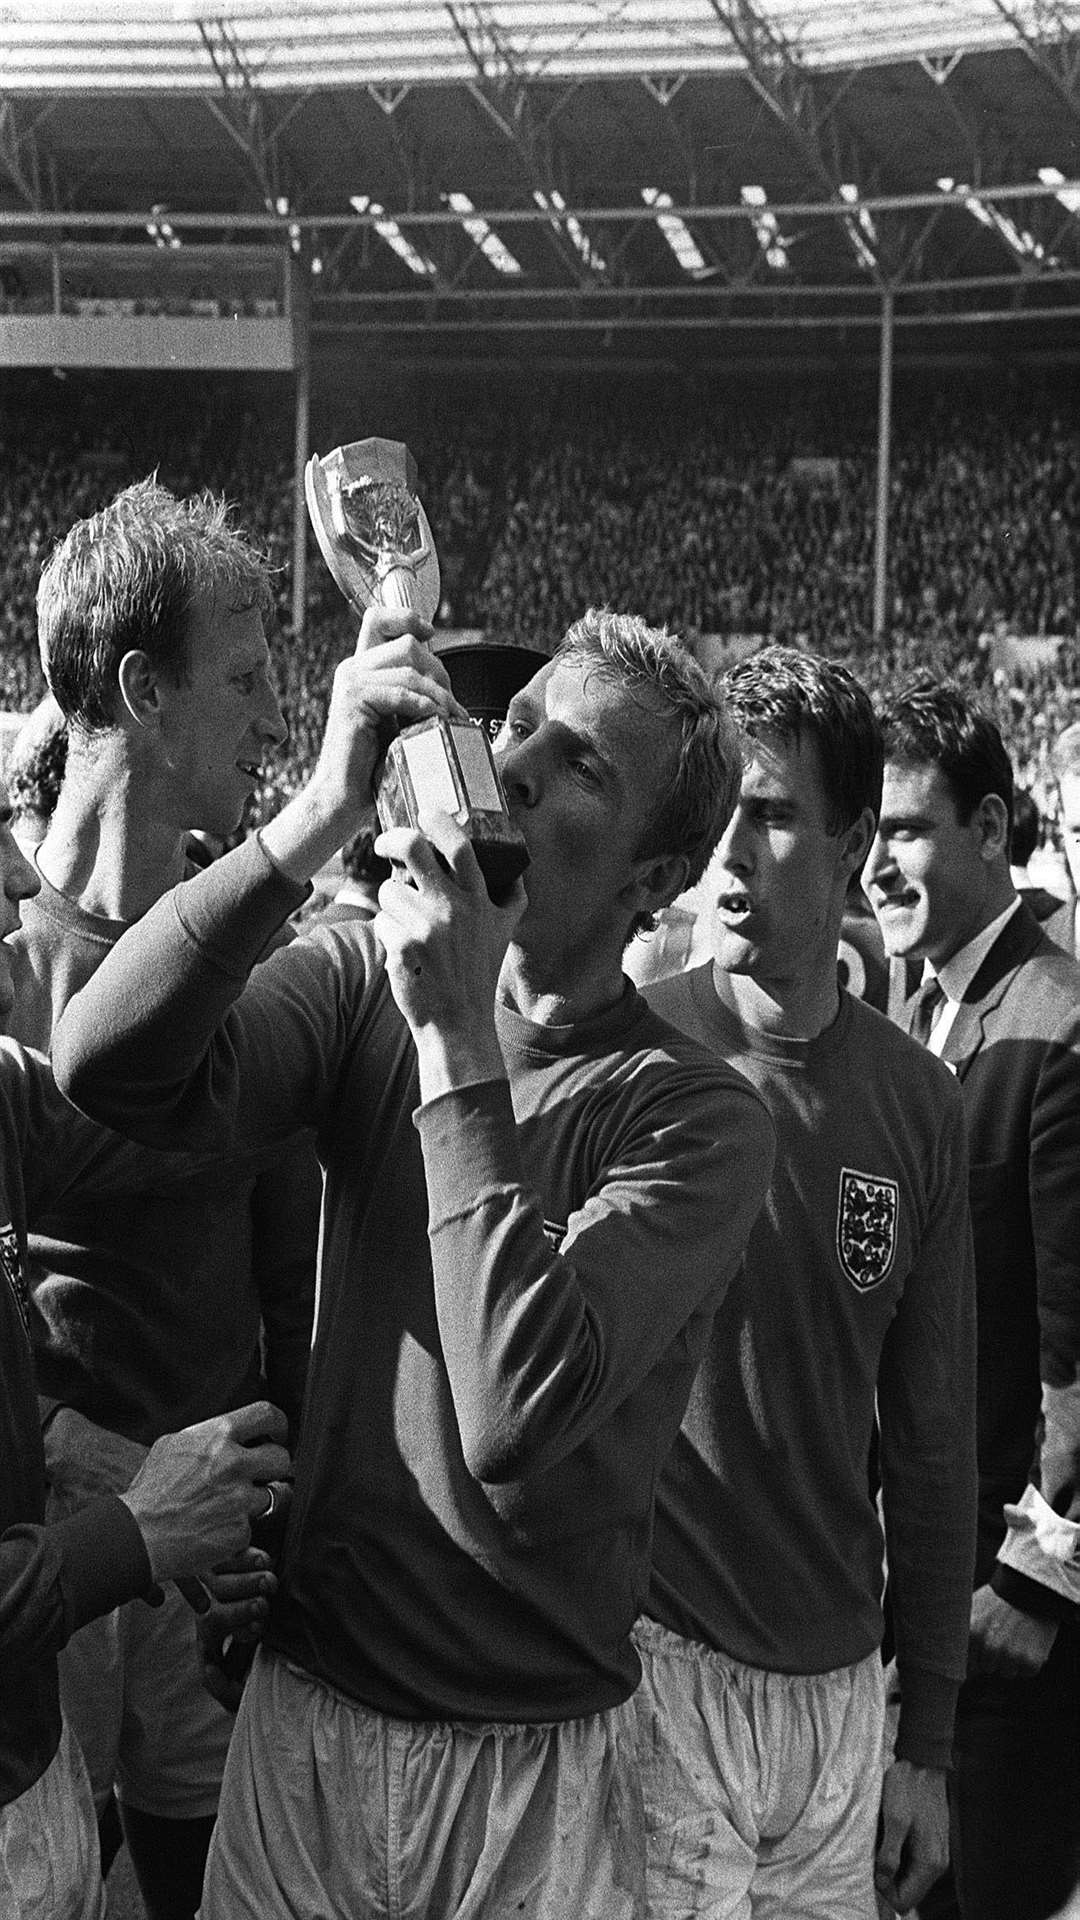 Bobby Moore planting an enthusiastic kiss on the World Cup trophy